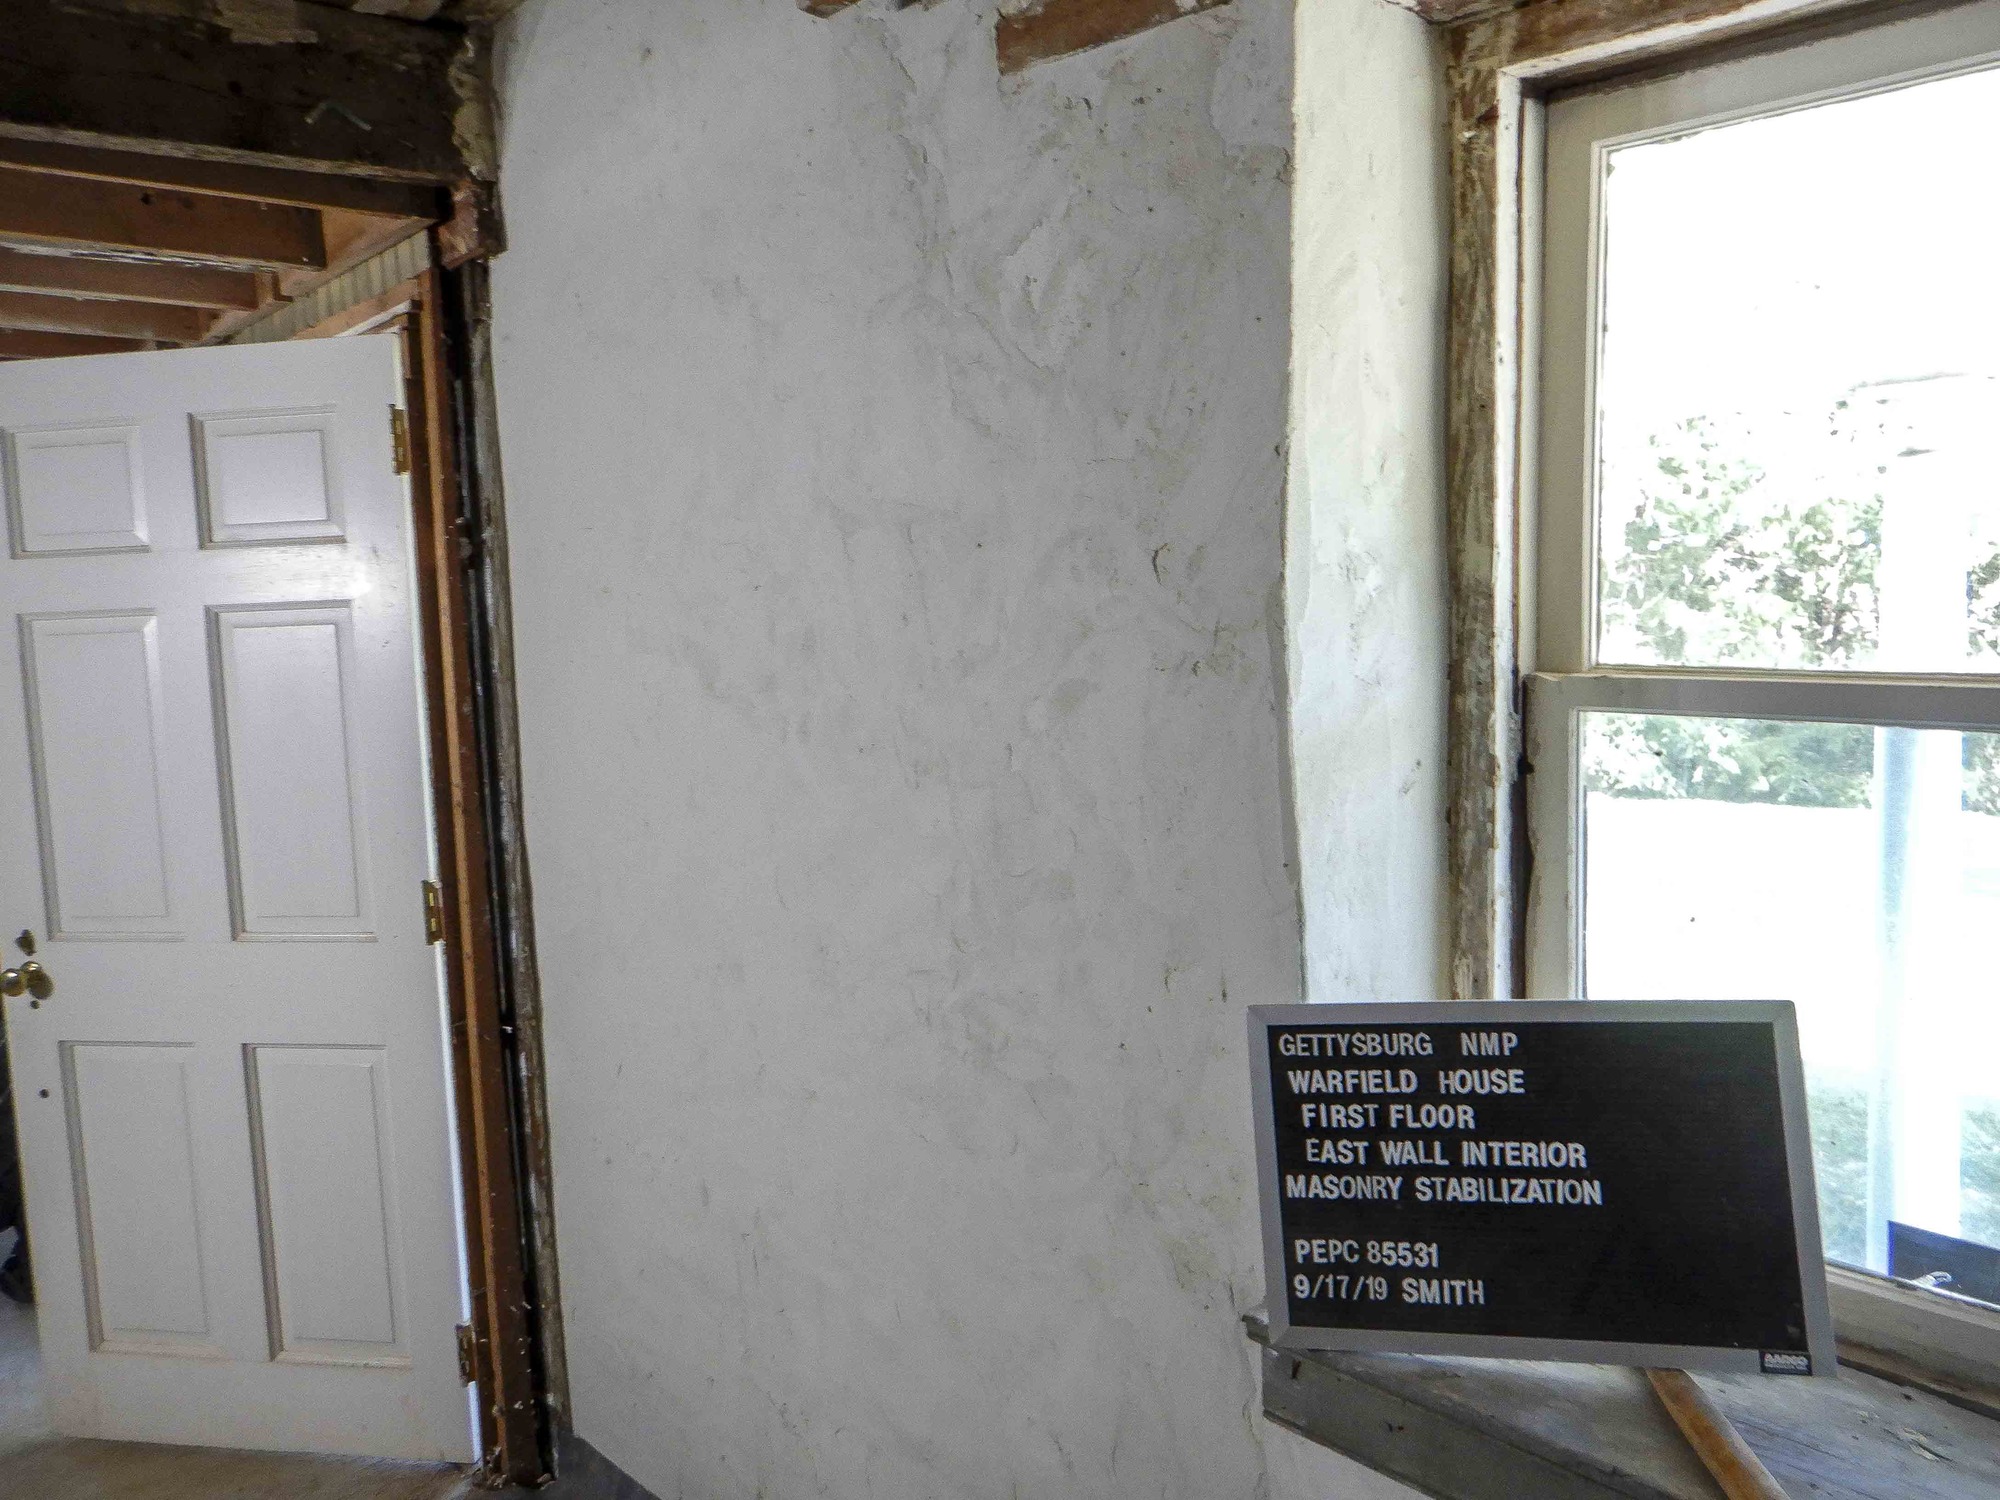 An interior stone wall is cover by a final coat of white plaster. There is a white door on the left and a window on the right.